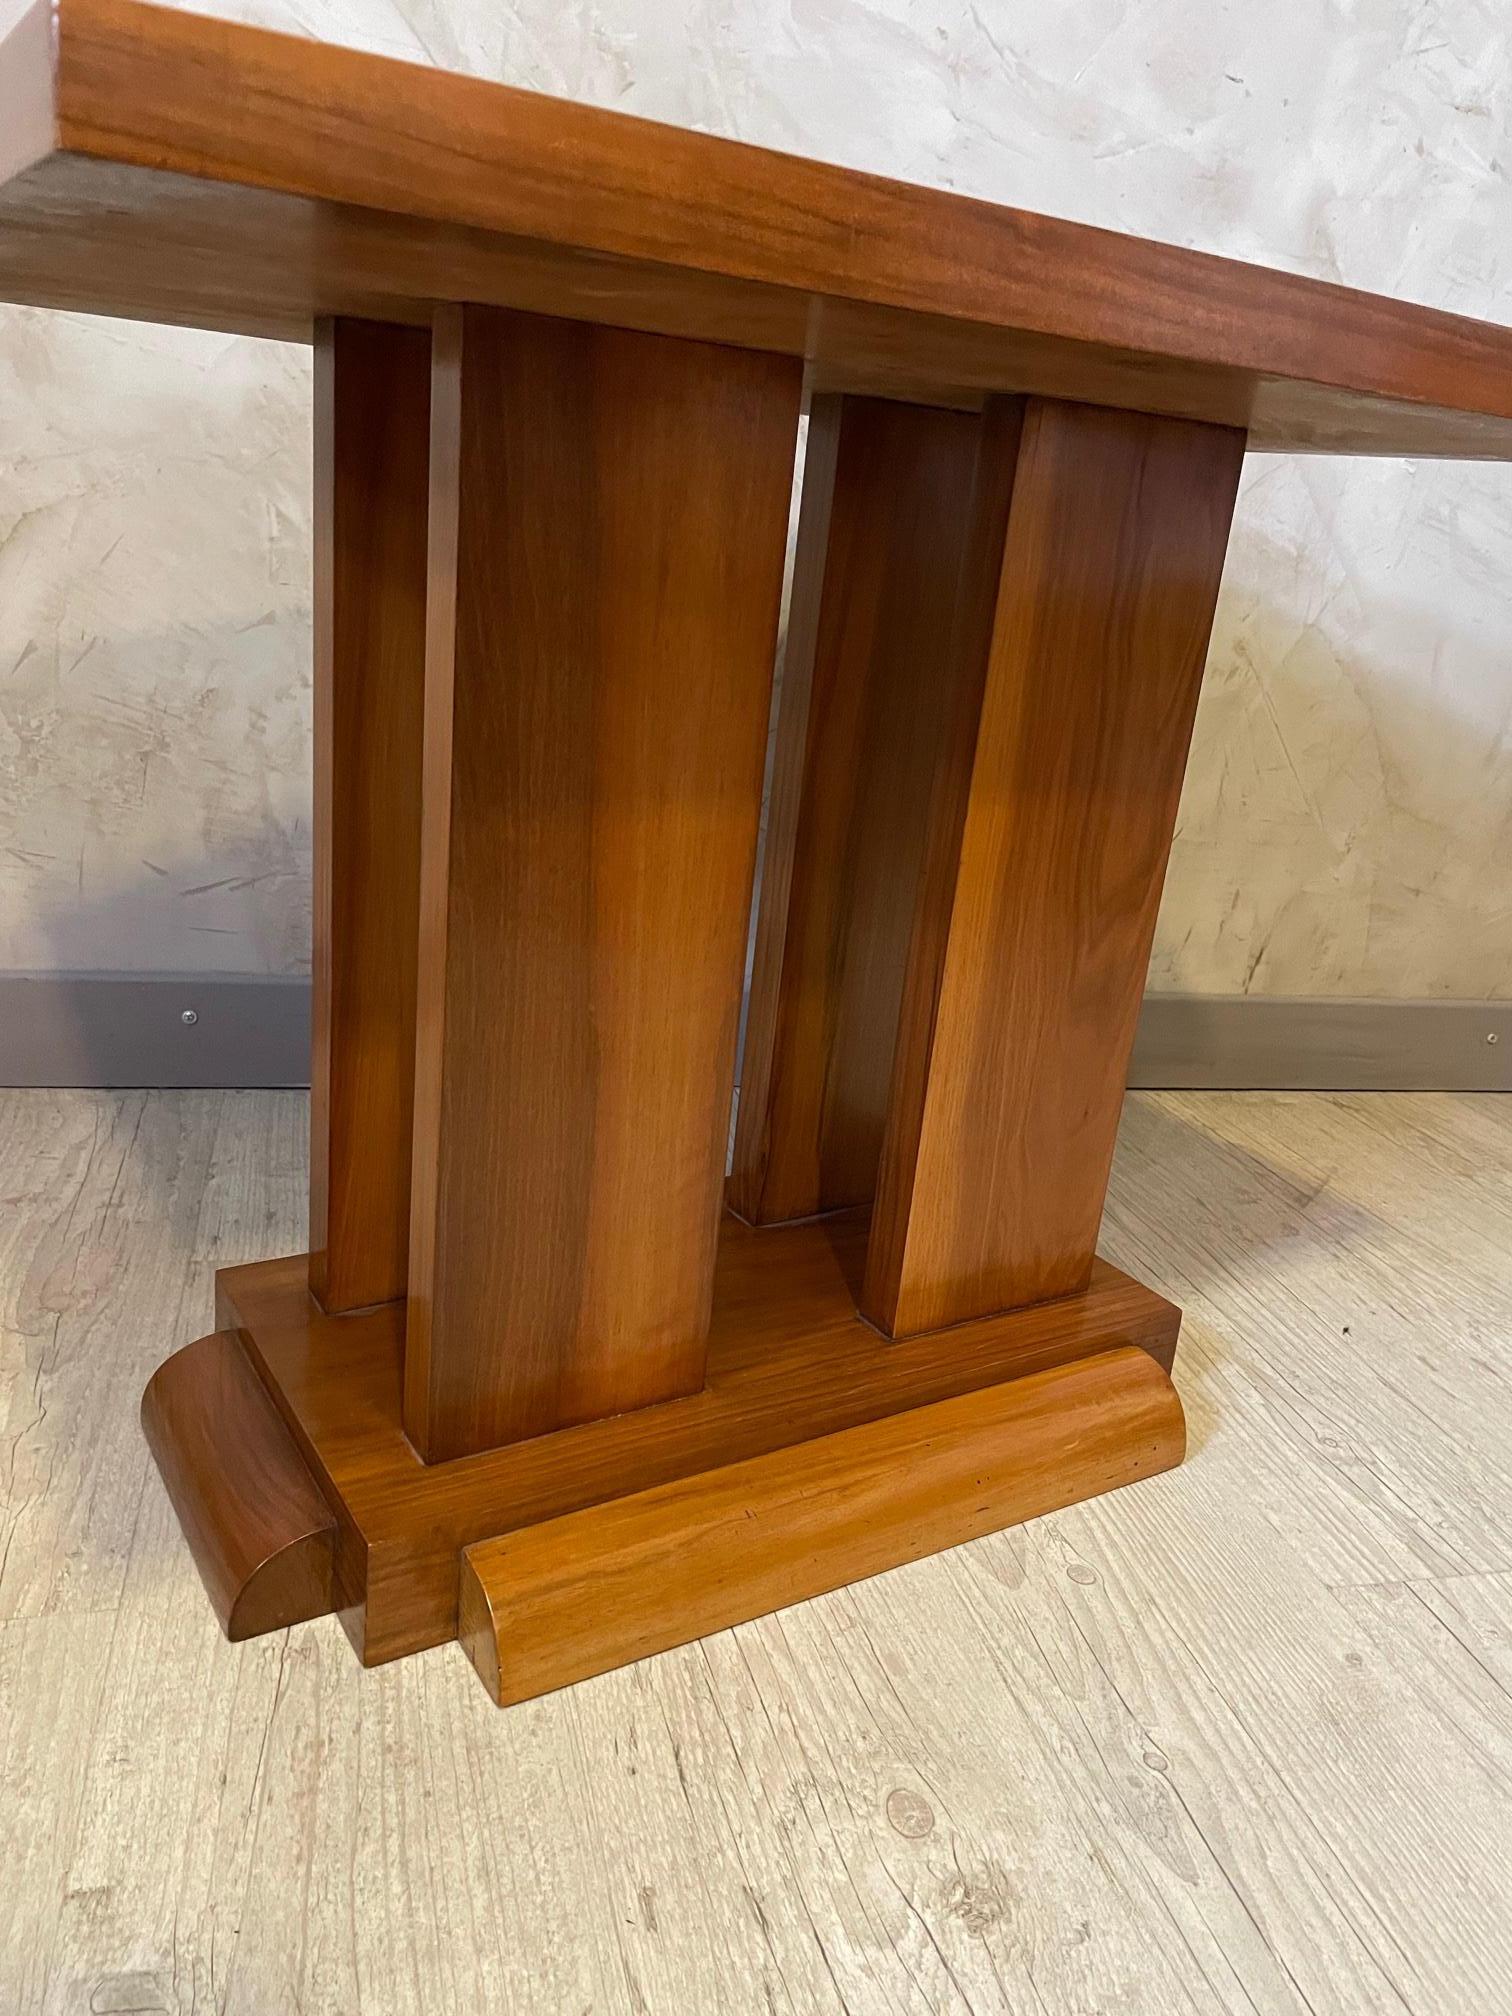 Beautiful 20th century French Art Deco walnut side table from the 1930s. 
Typical Art Deco base details. 
Nice condition and quality.